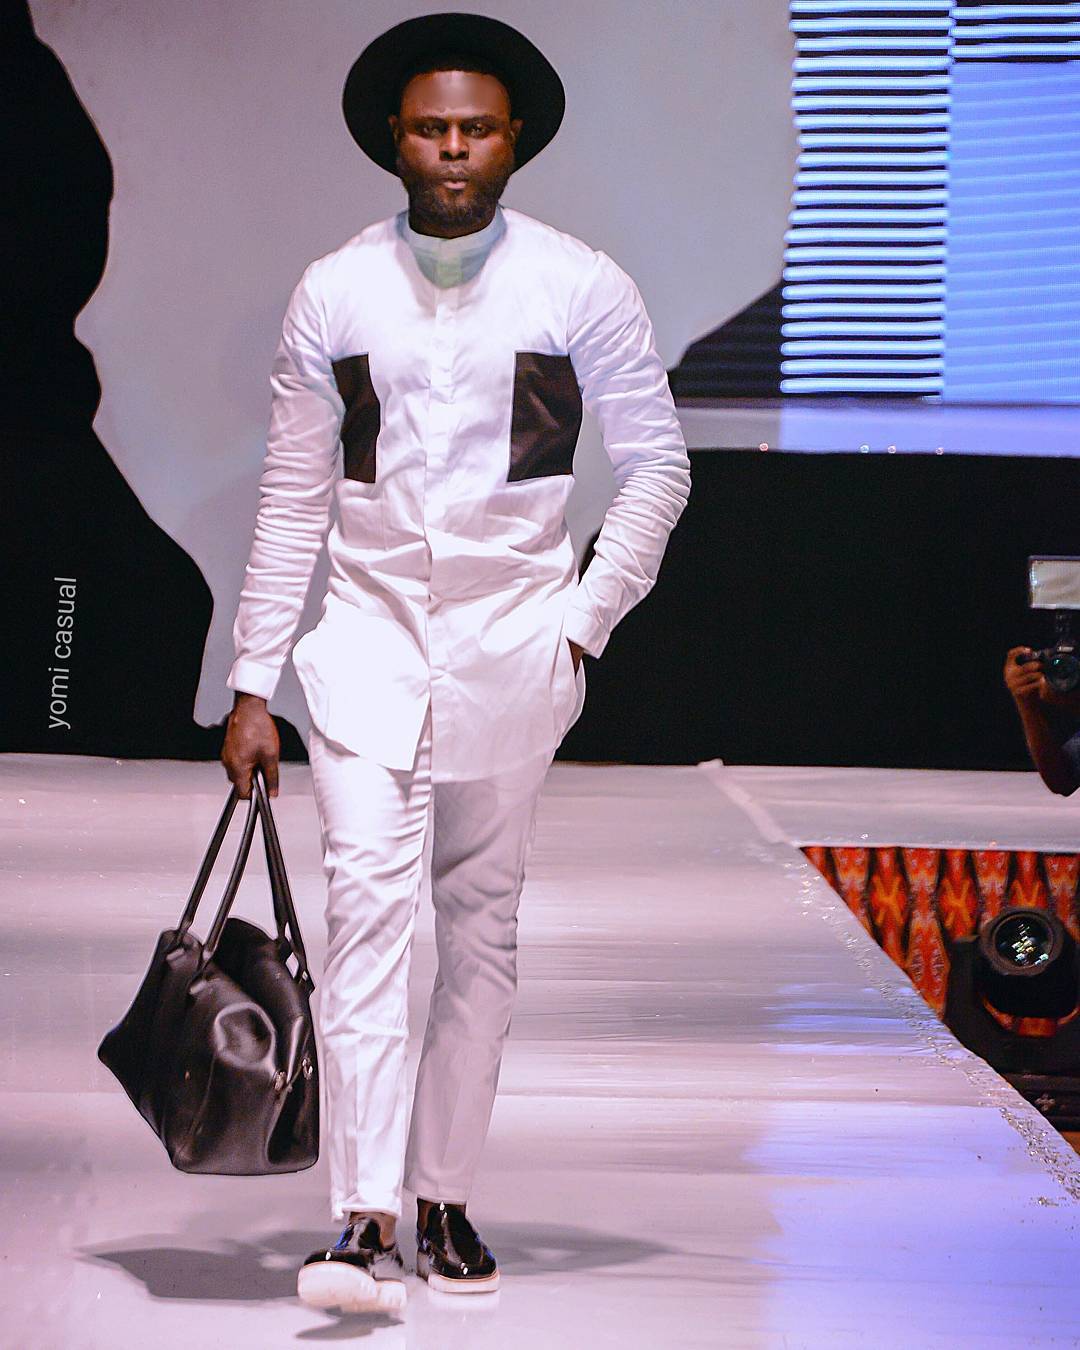 yomi-casual-latest-designs-the-most-stylish-wears-from-all-his-collections-3